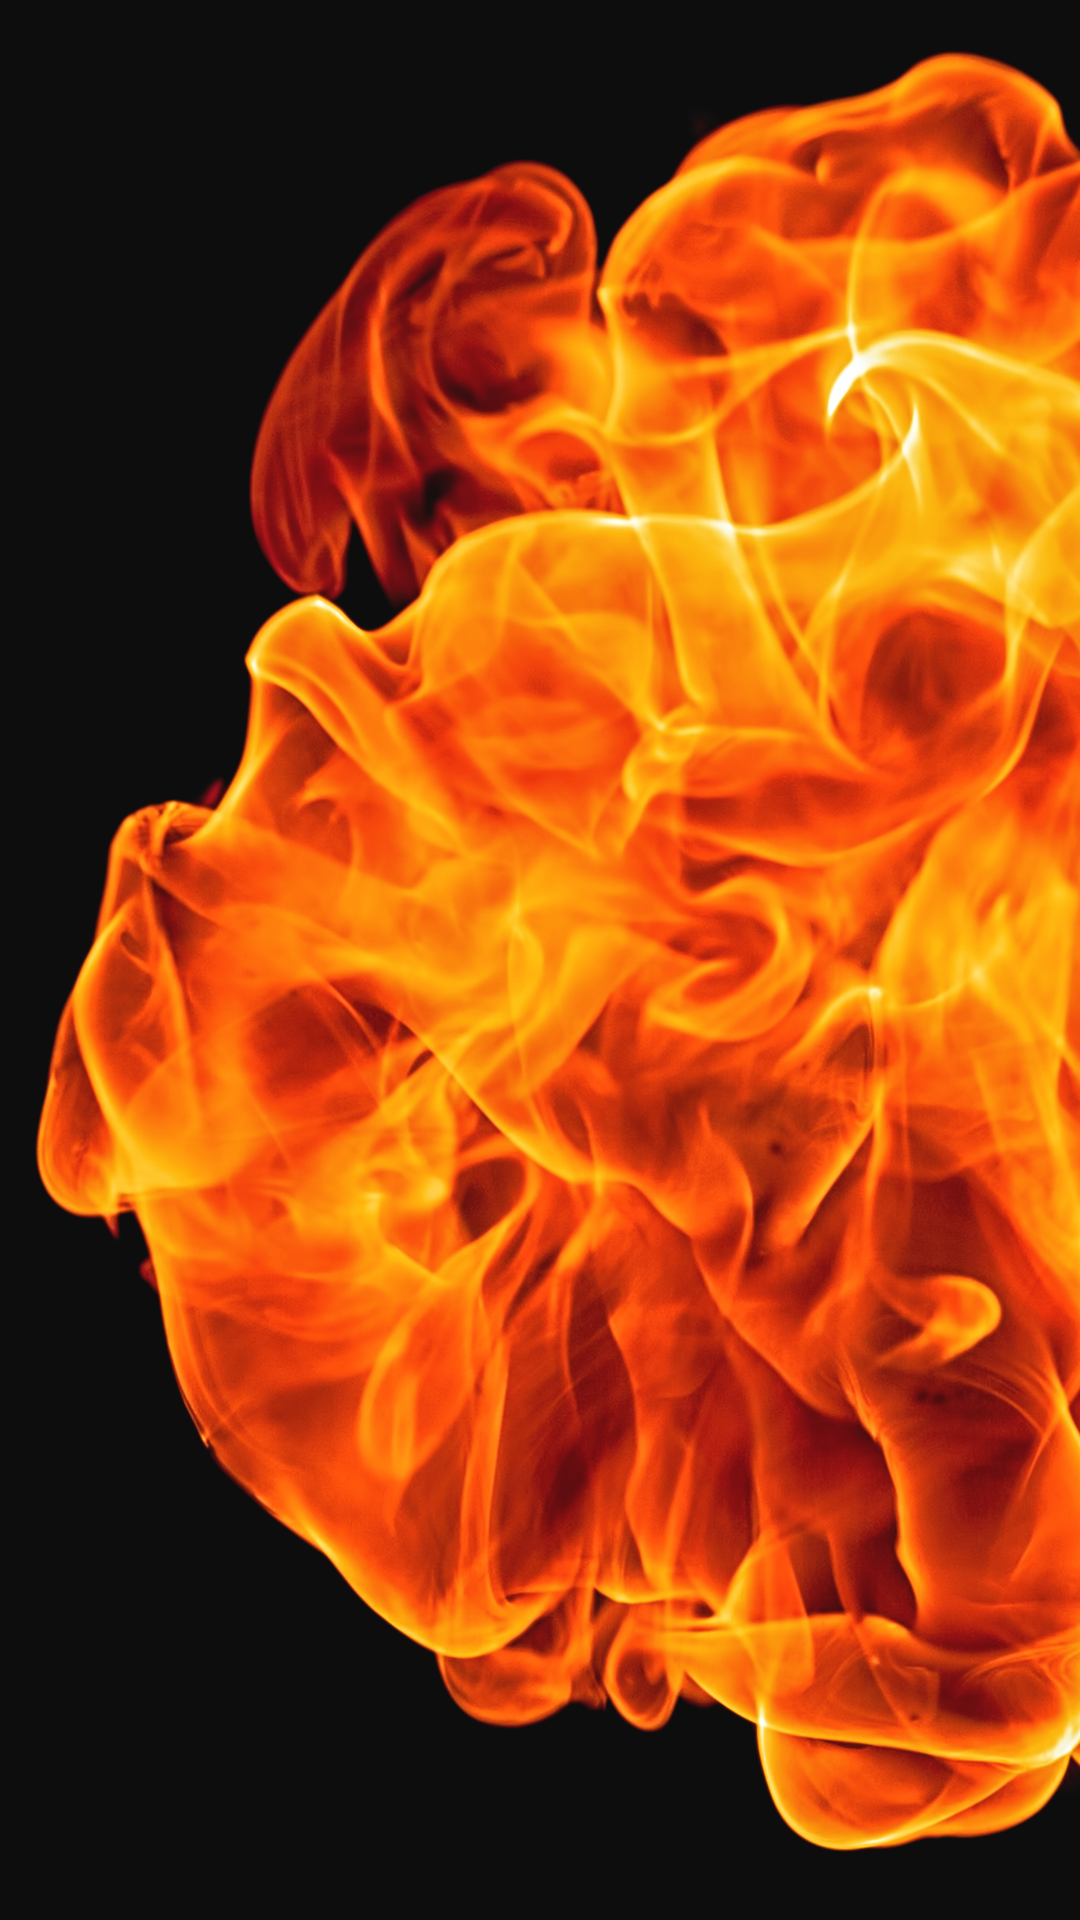 hot hd wallpaper for android,flame,orange,fire,heat,peach